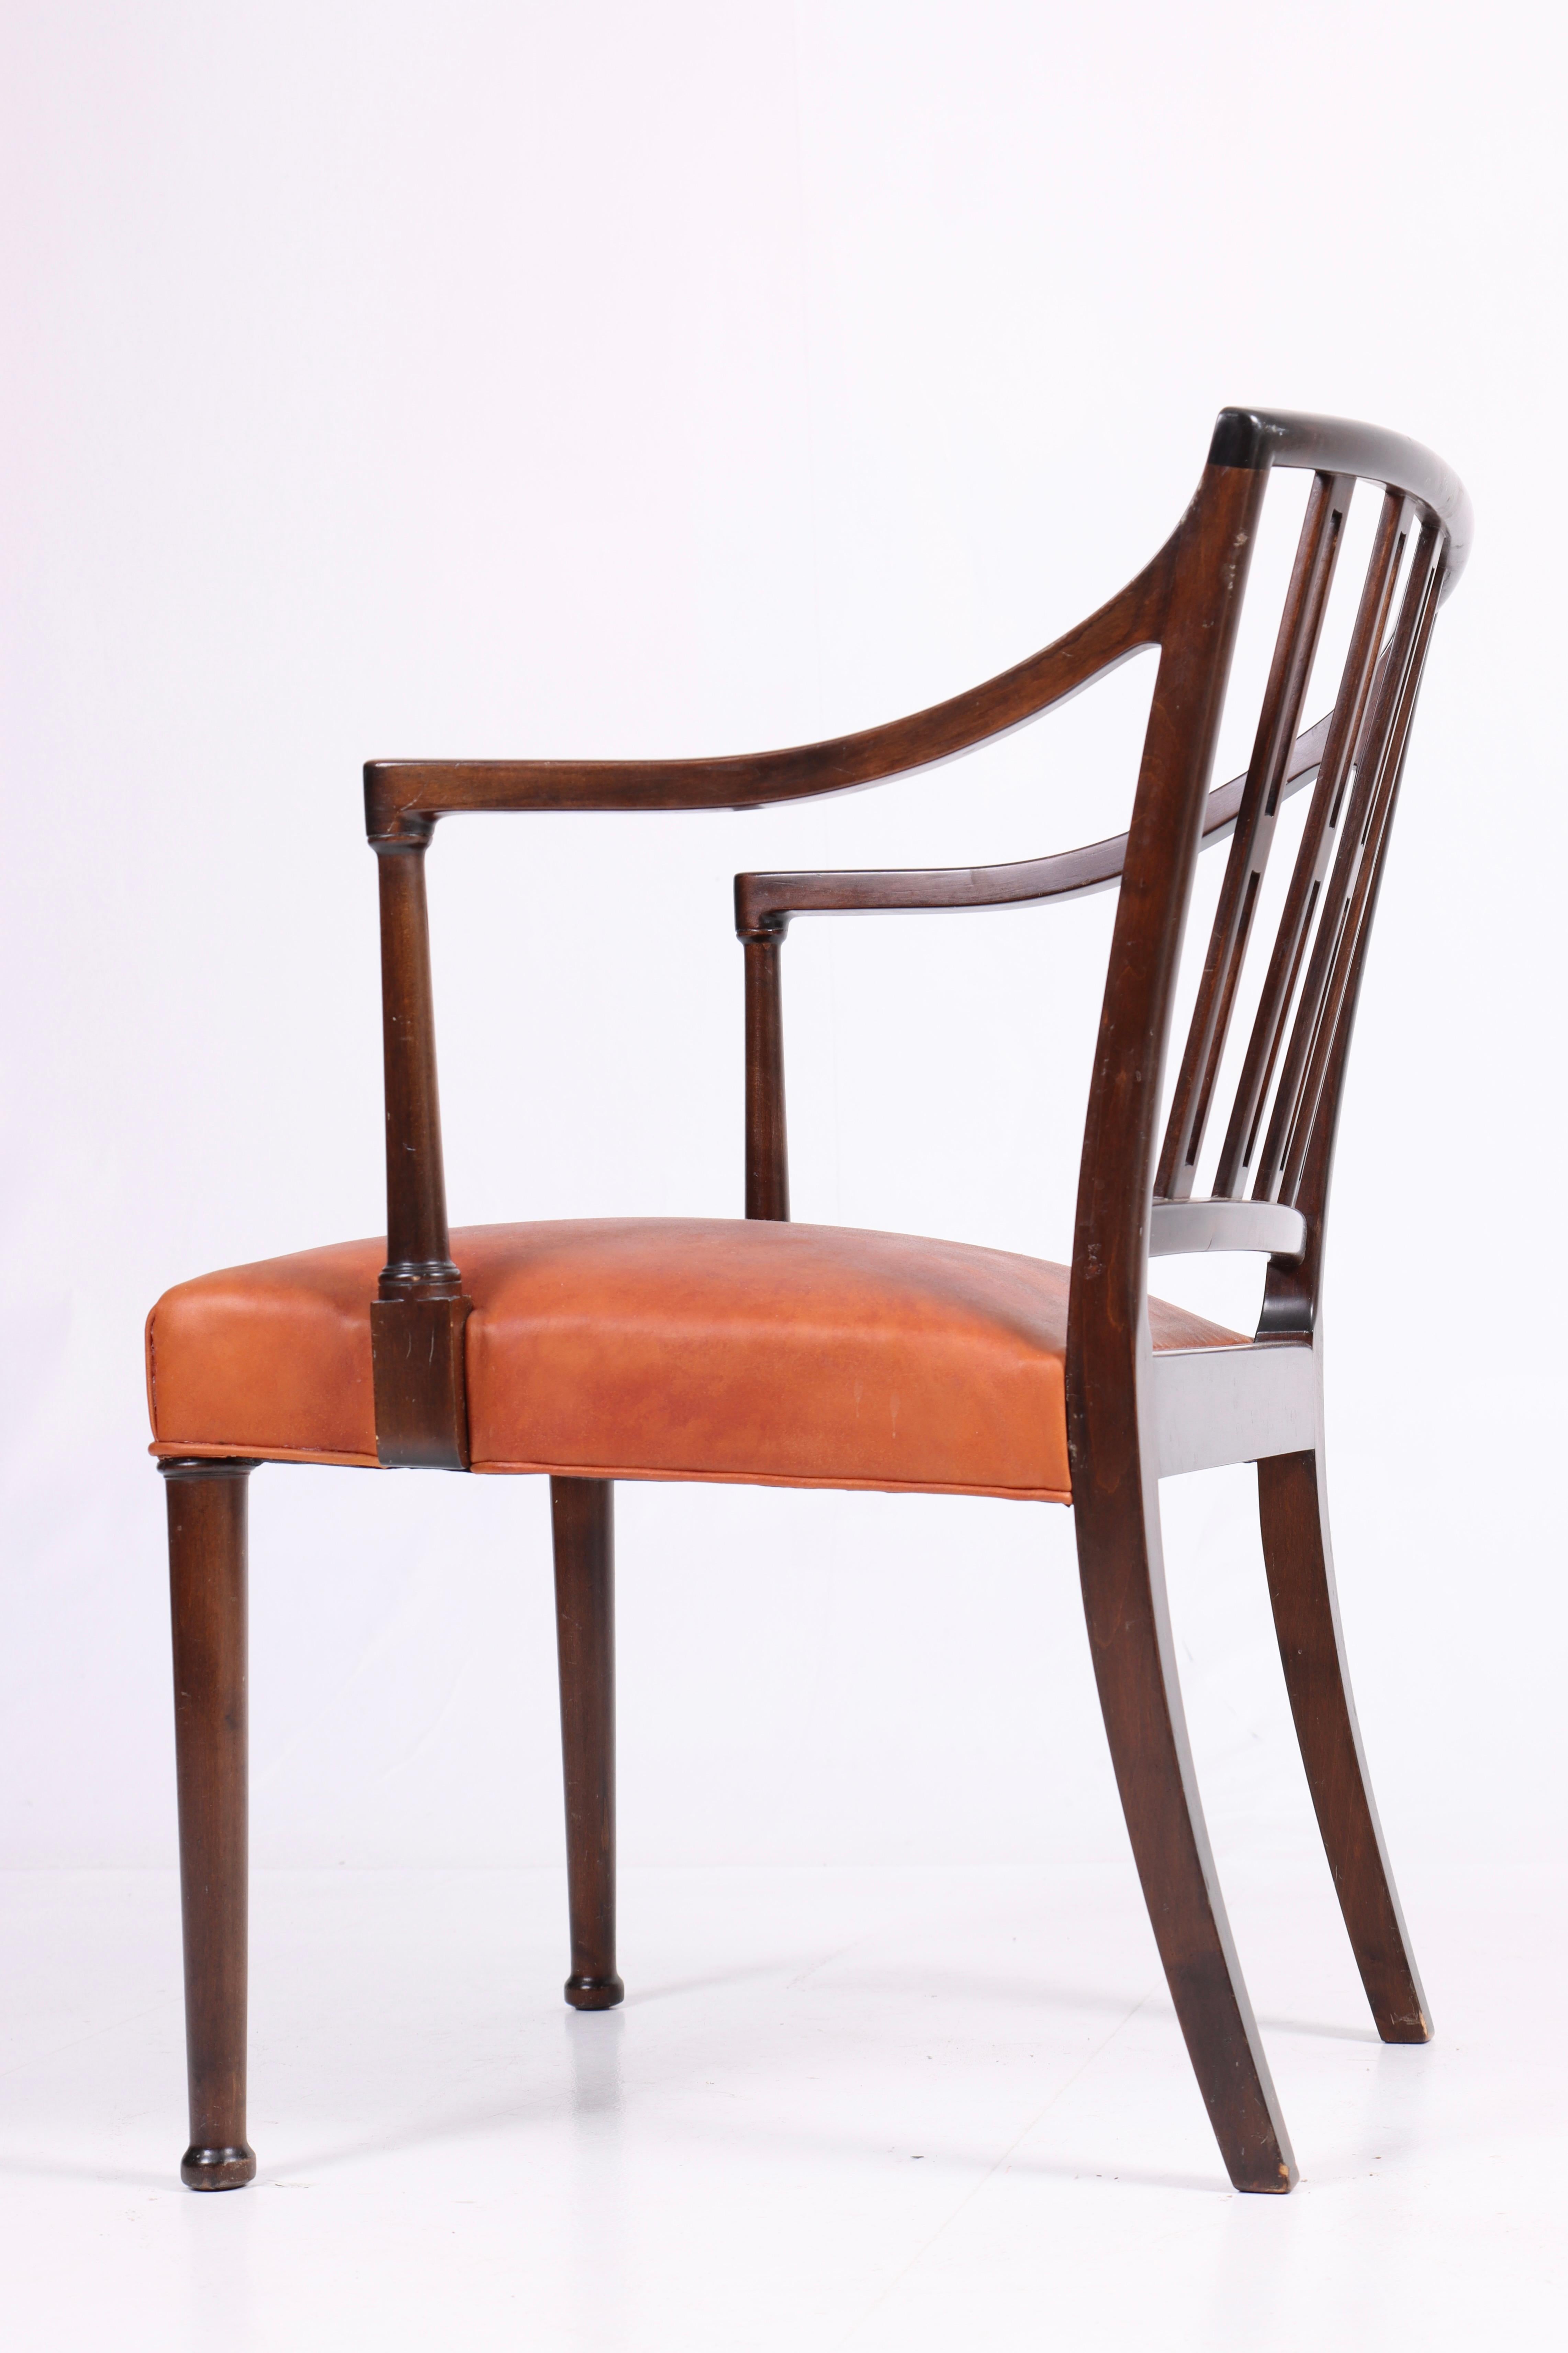 Mid-20th Century Lounge Chair in Leather by Ole Wanscher, Made in Denmark, 1950s For Sale